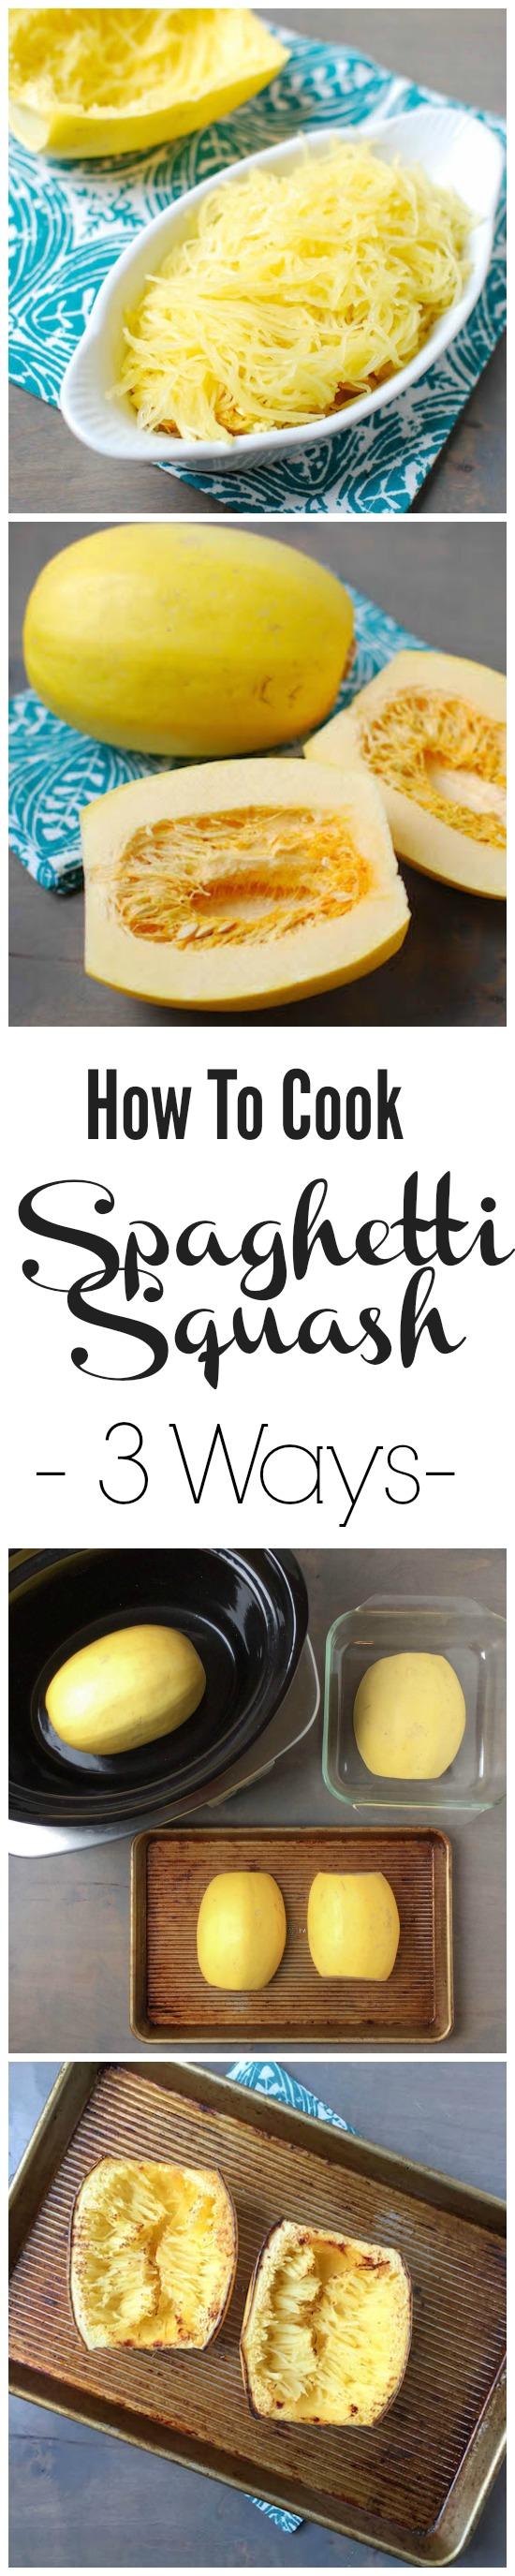 Want to learn how to cook spaghetti squash? Here are 3 different ways to try it, plus recipe ideas!